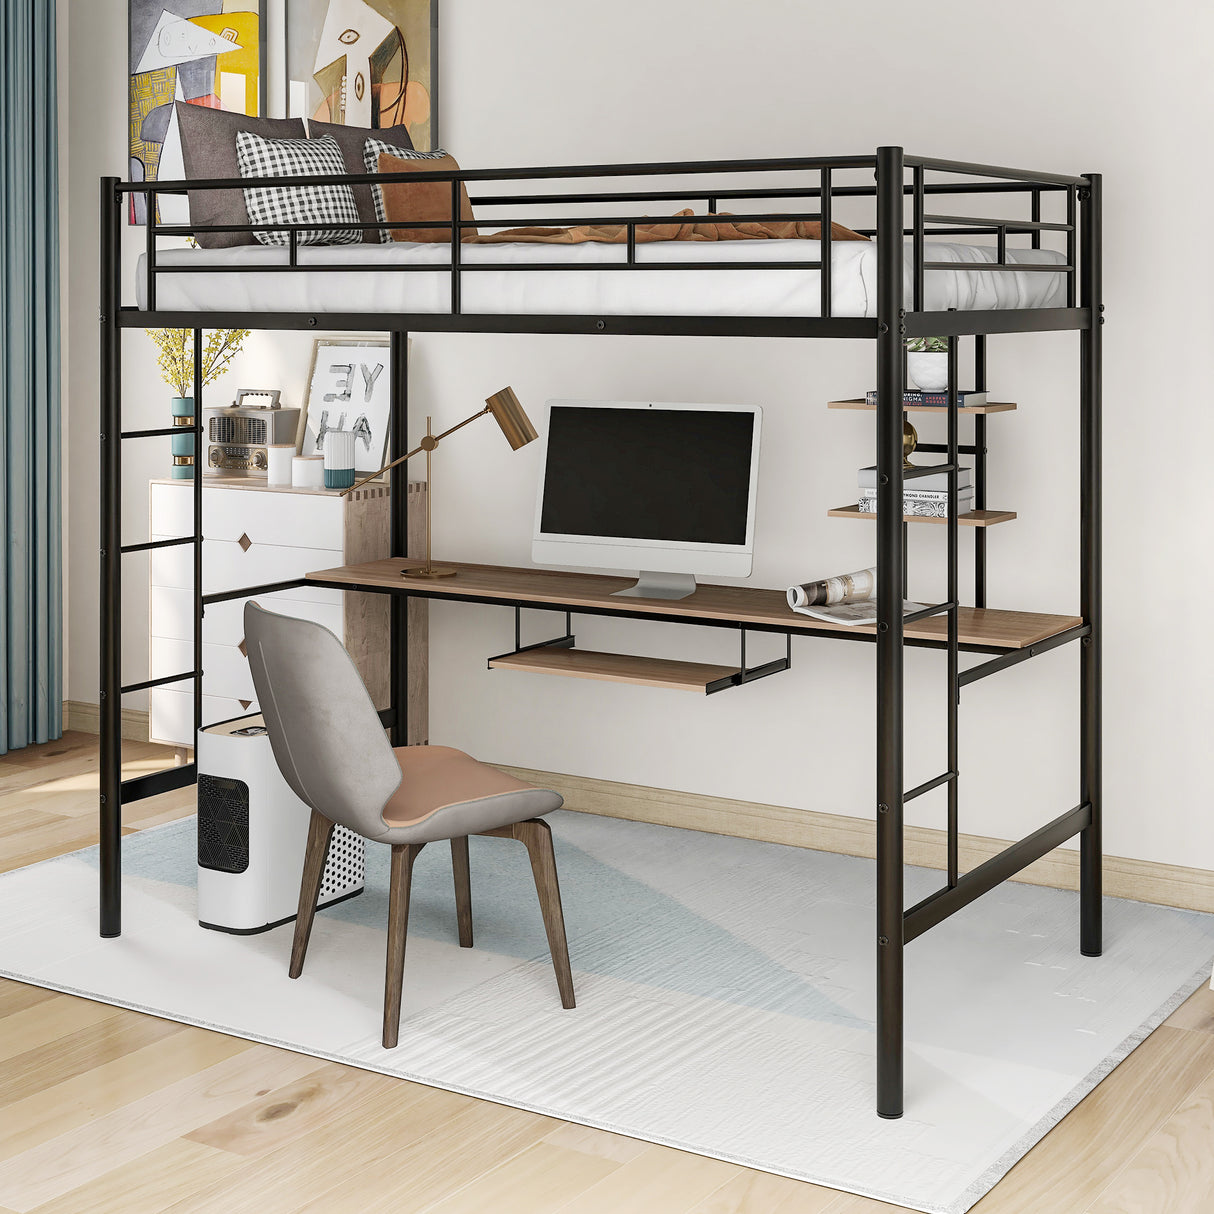 space-saving furniture store: What to buy, from desks to